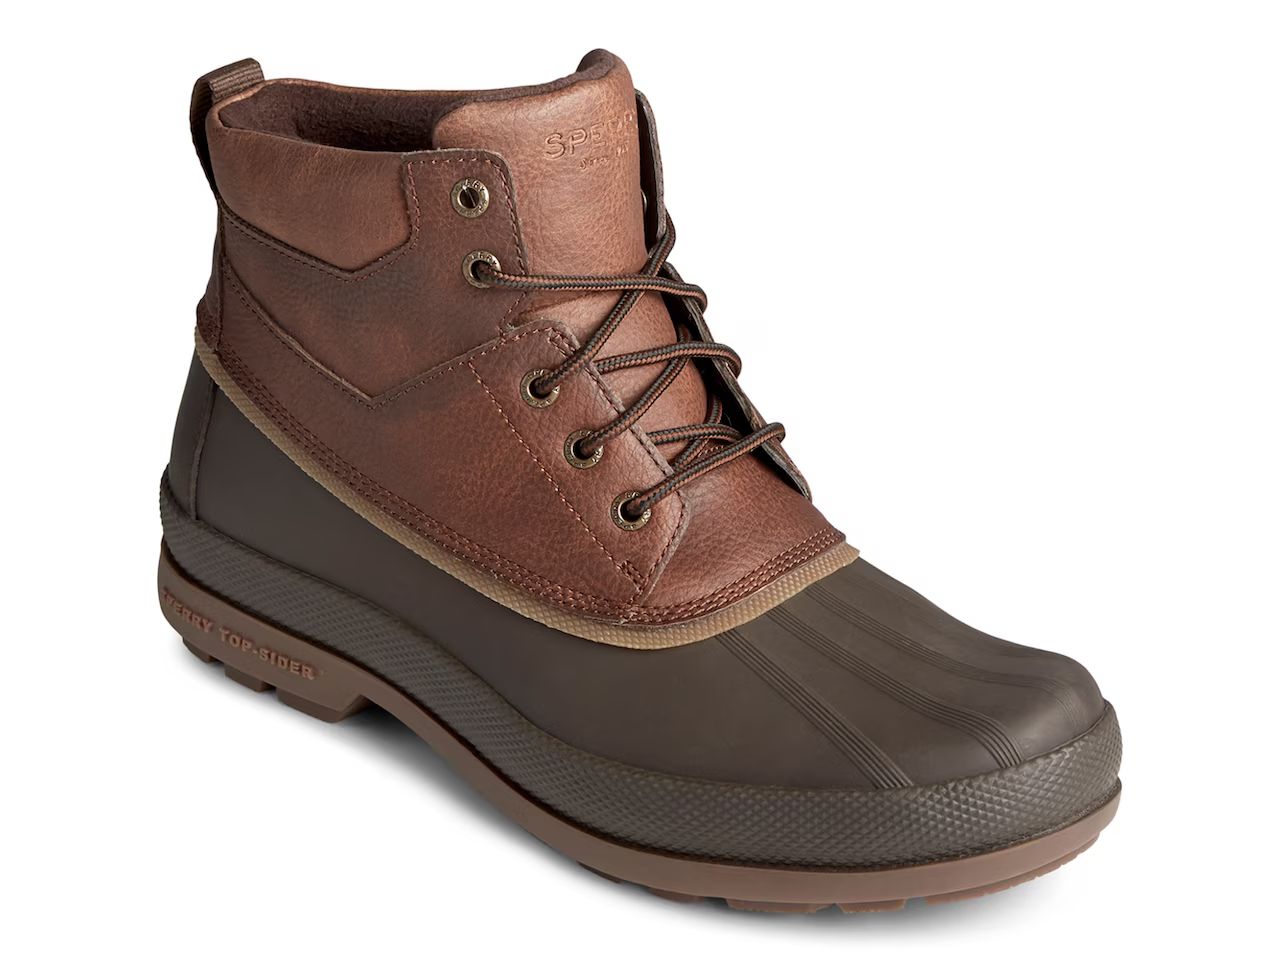 Sperry Cold Bay Chukka Duck Boot | DSW